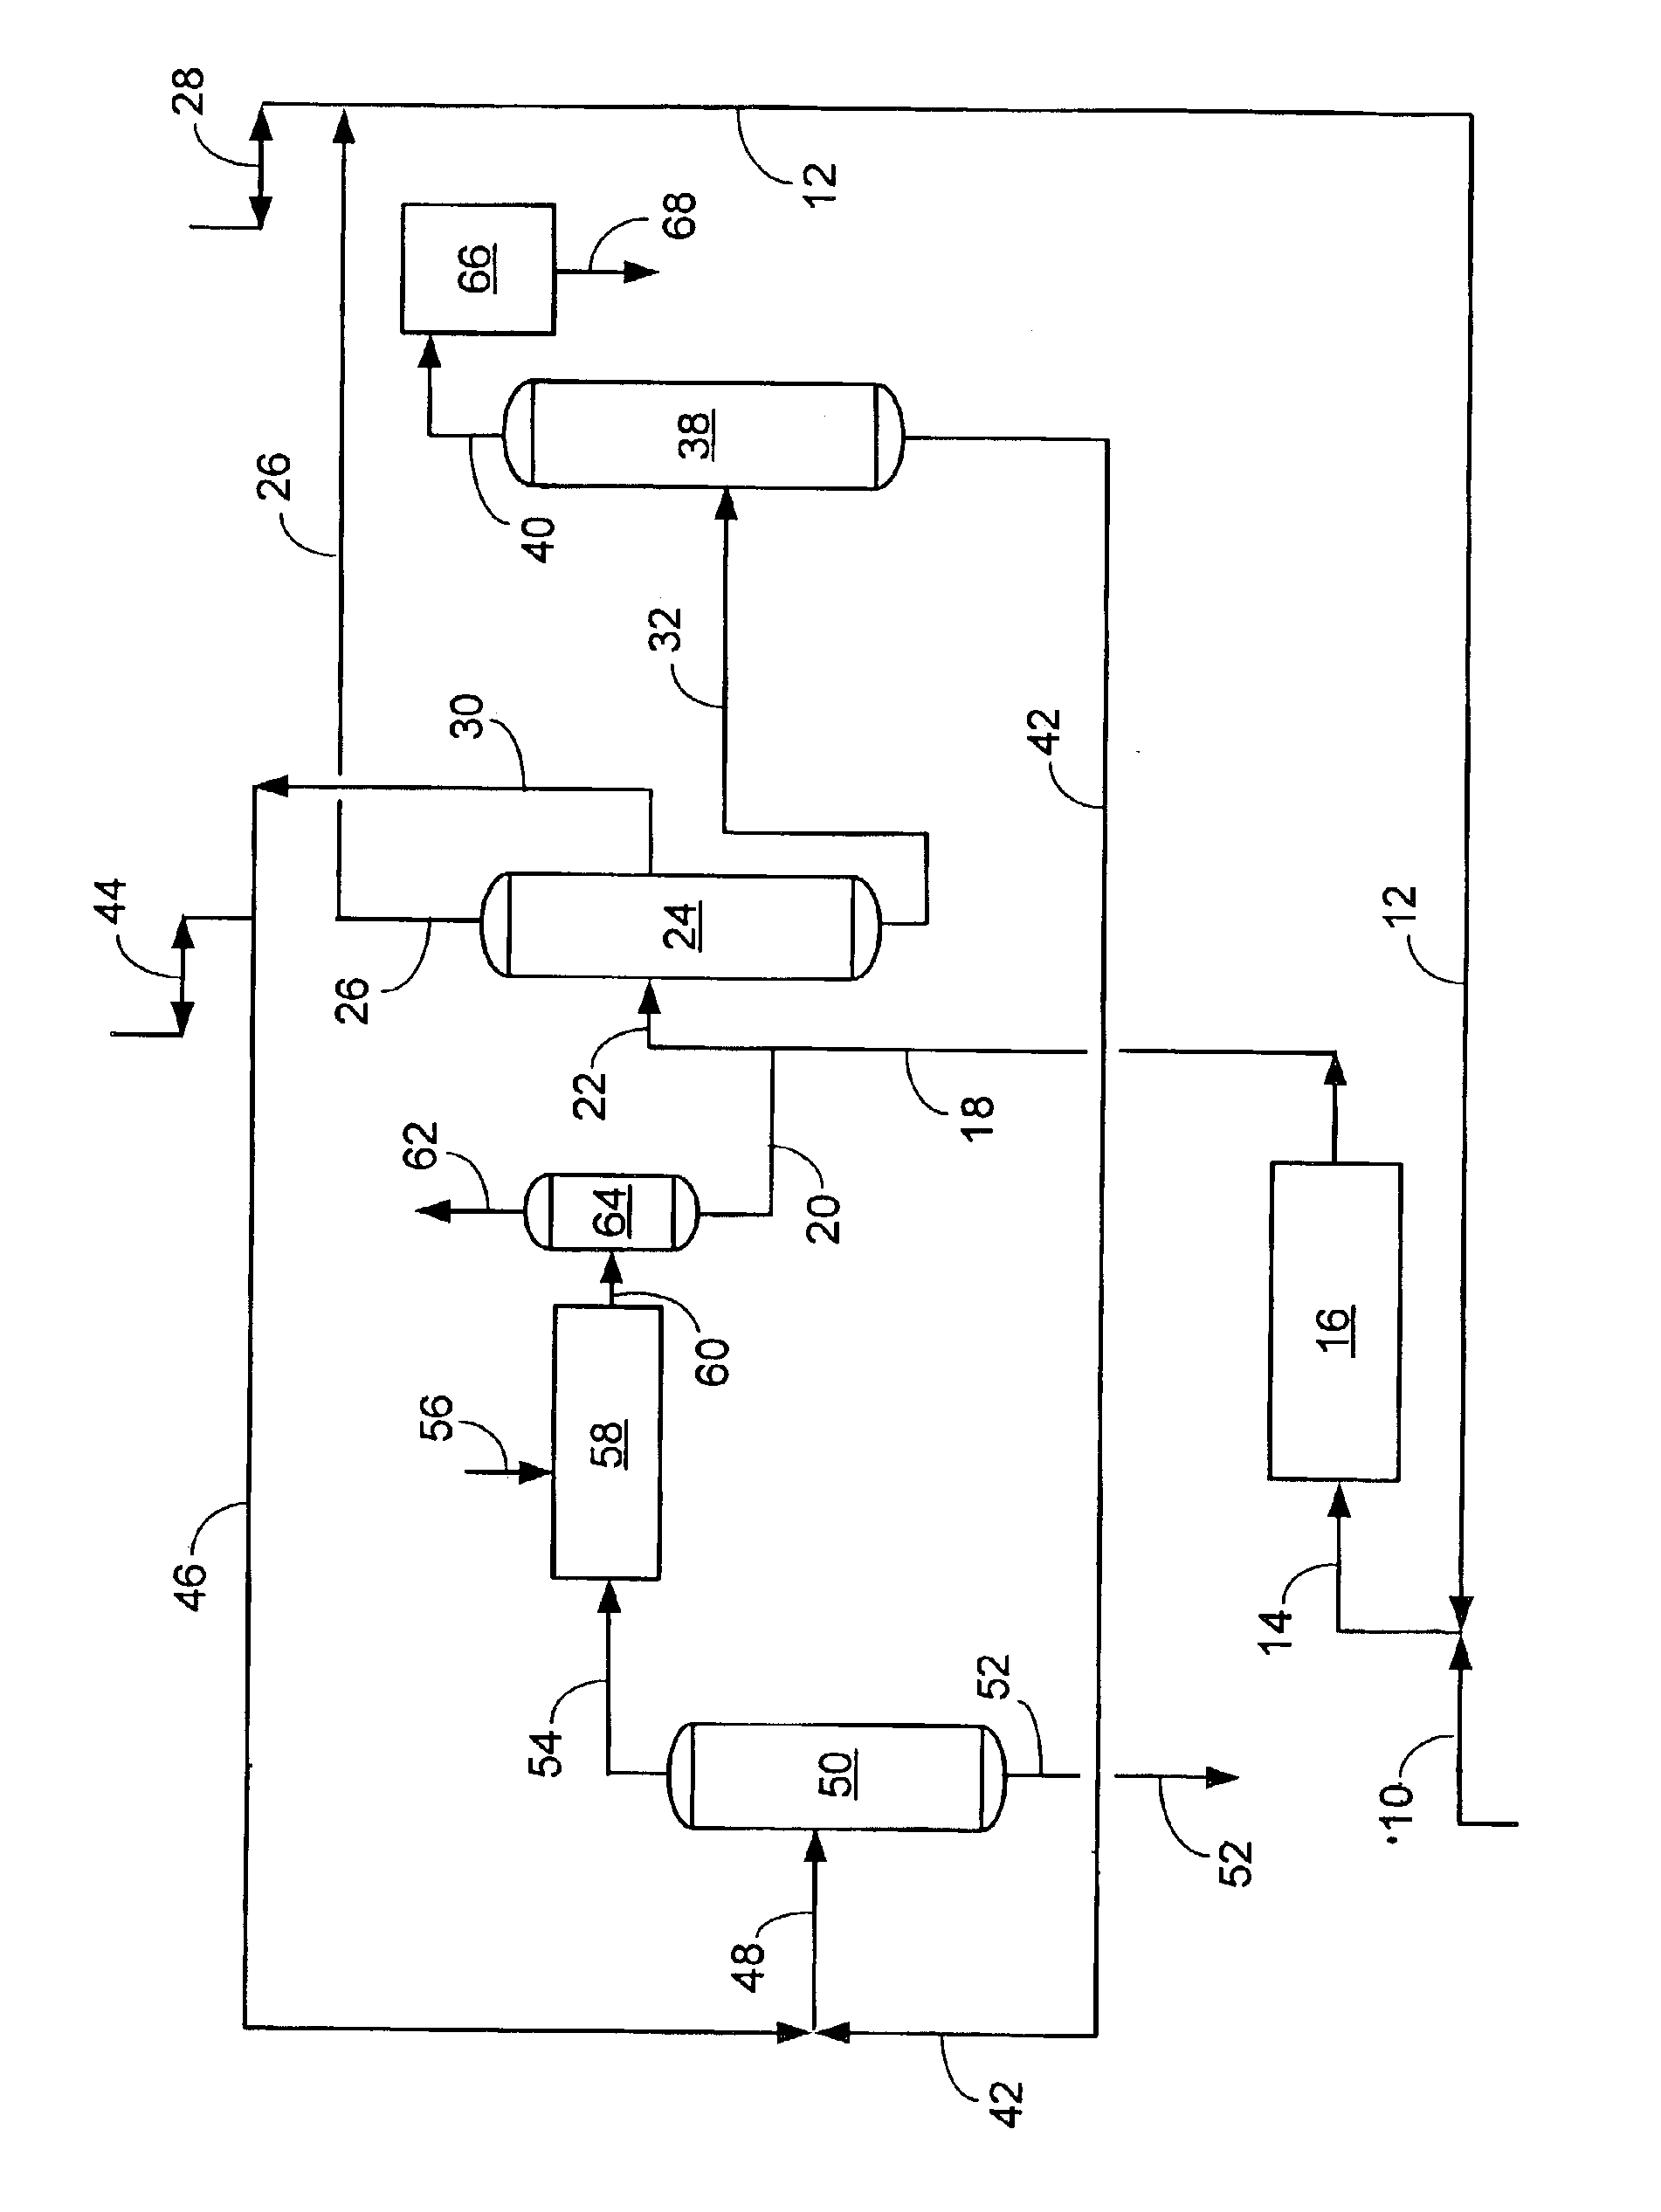 Process and apparatus for ethylbenzene production and transalkylation to xylene